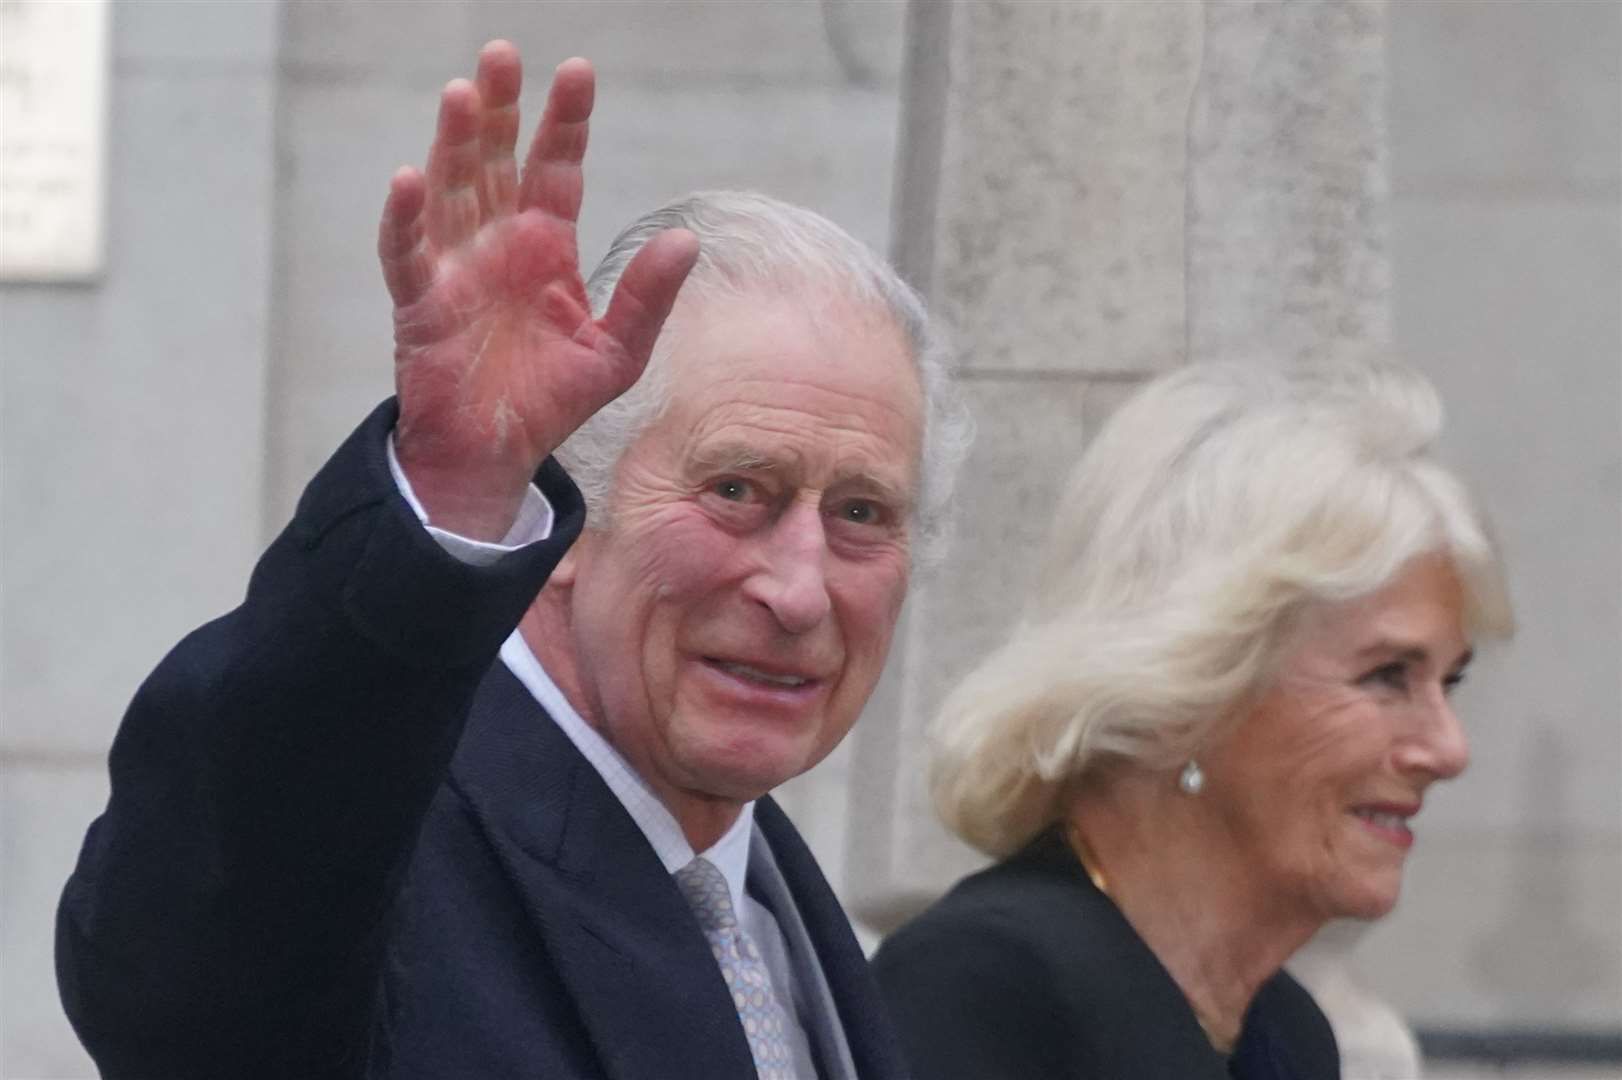 The King is expected to spend time recuperating after his treatment (Victoria Jones/PA)